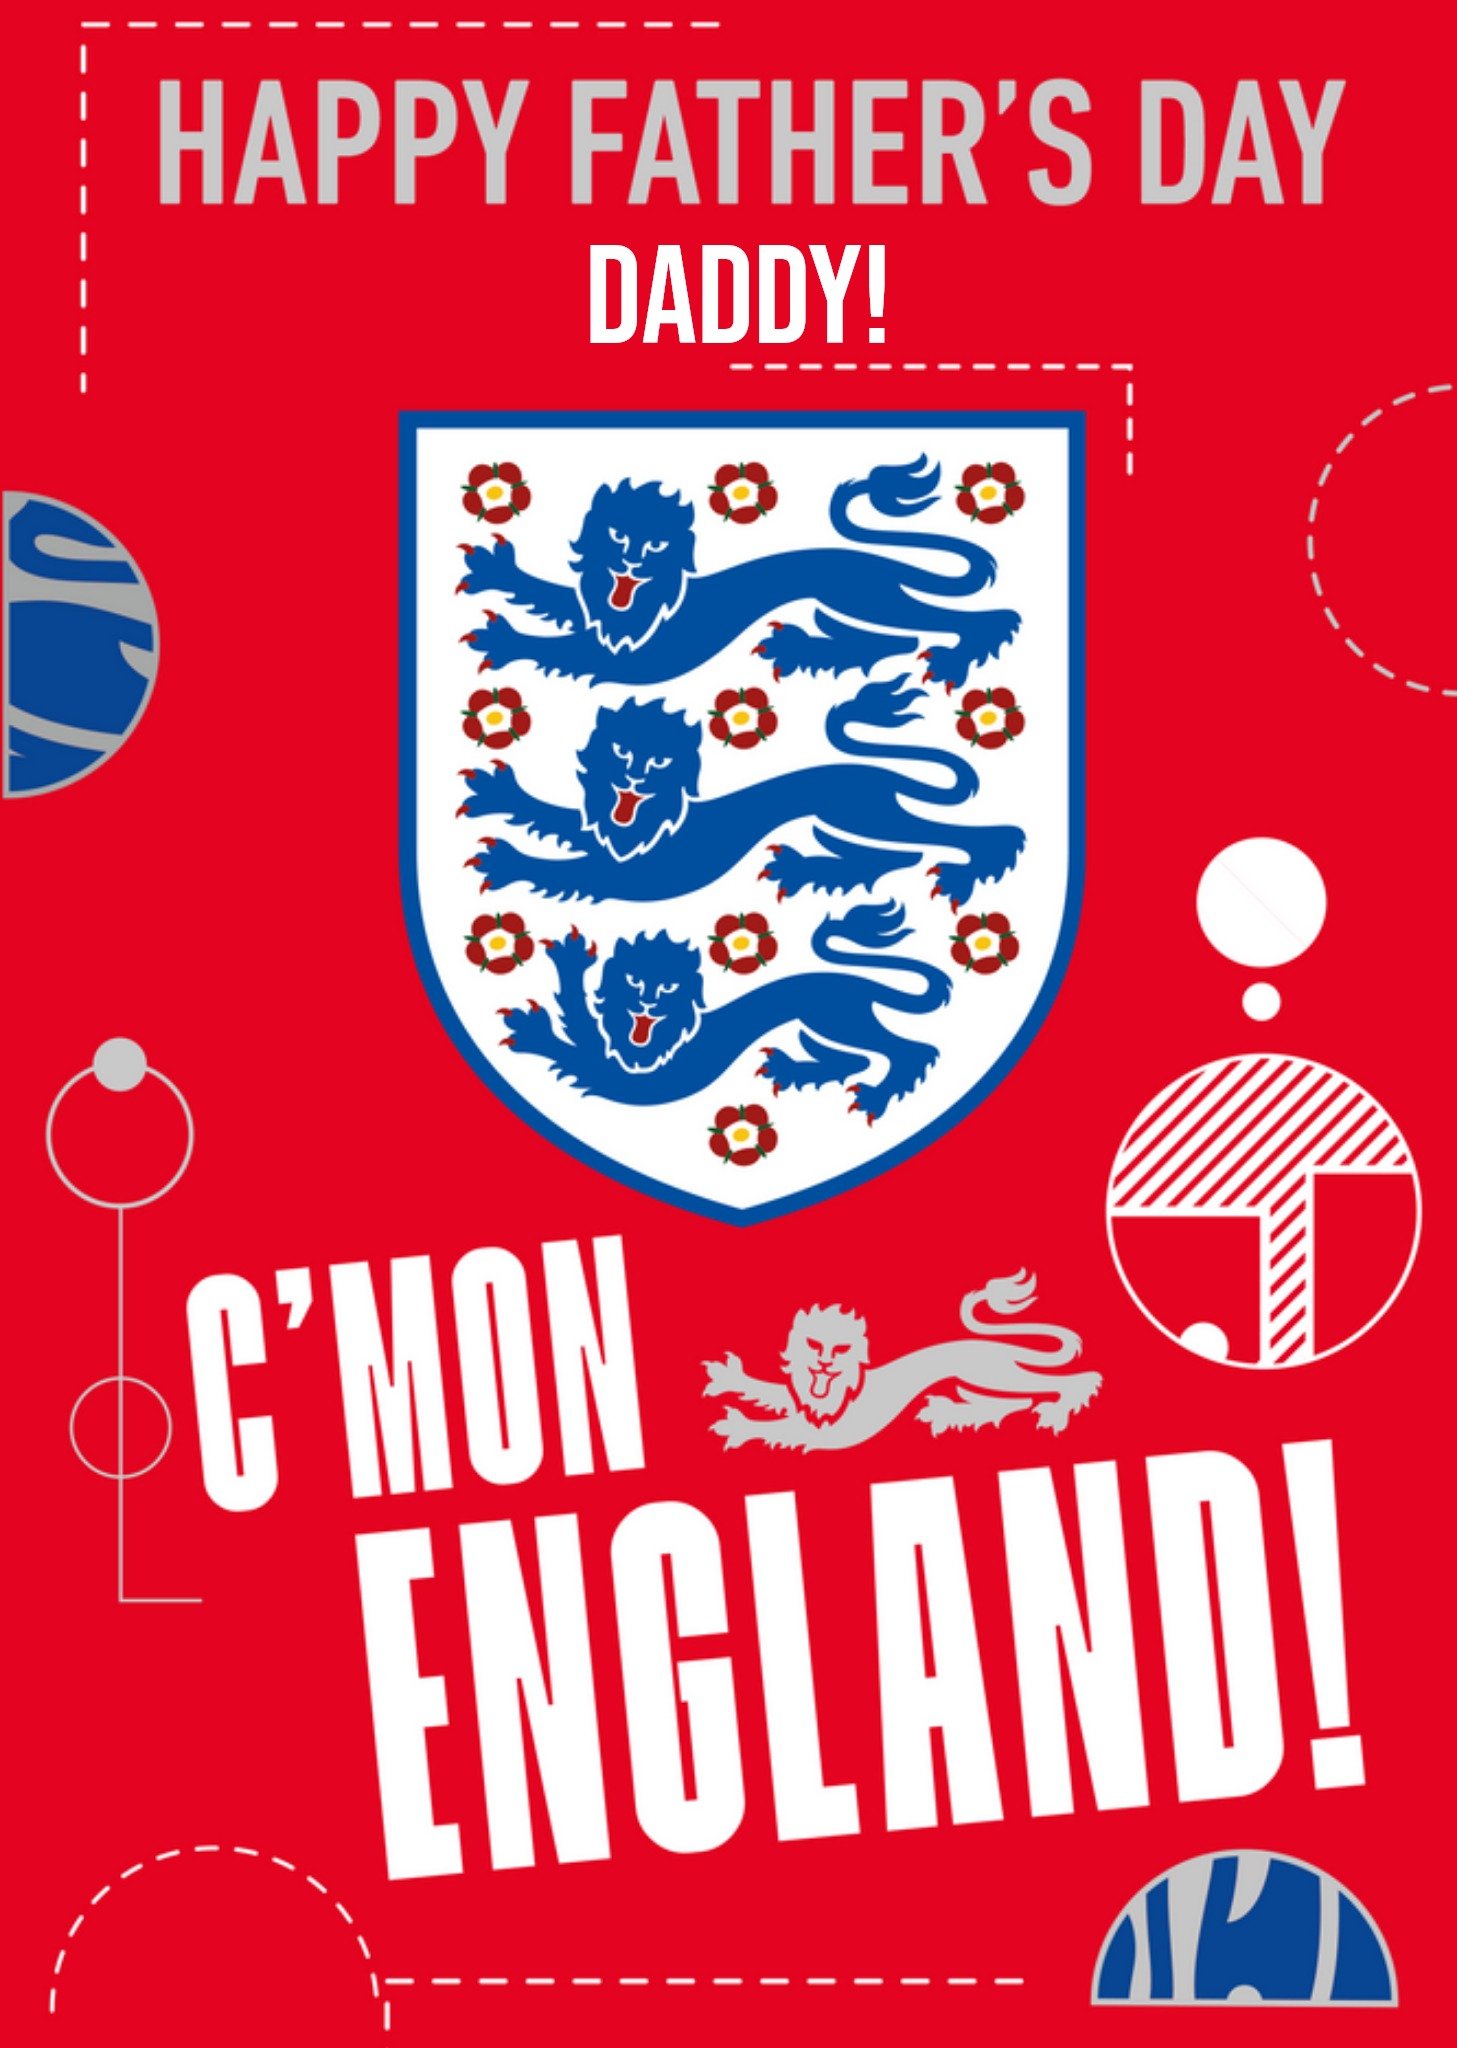 Other Danilo England Happy Fathers Day Daddy Come On England 3 Lions Shield Card, Large